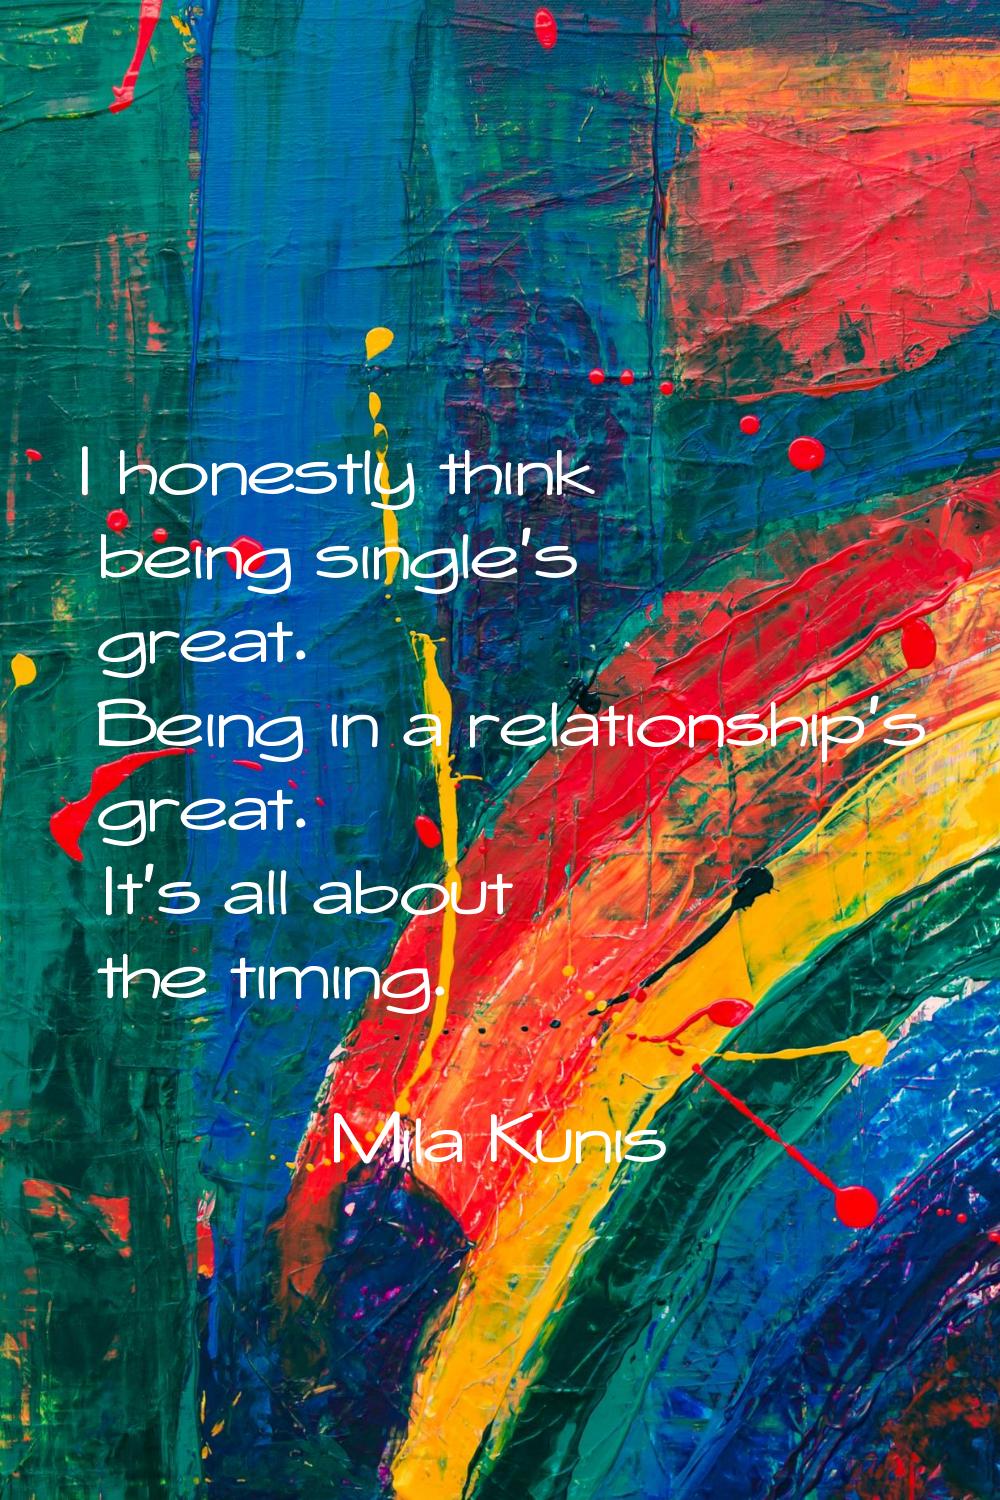 I honestly think being single's great. Being in a relationship's great. It's all about the timing.